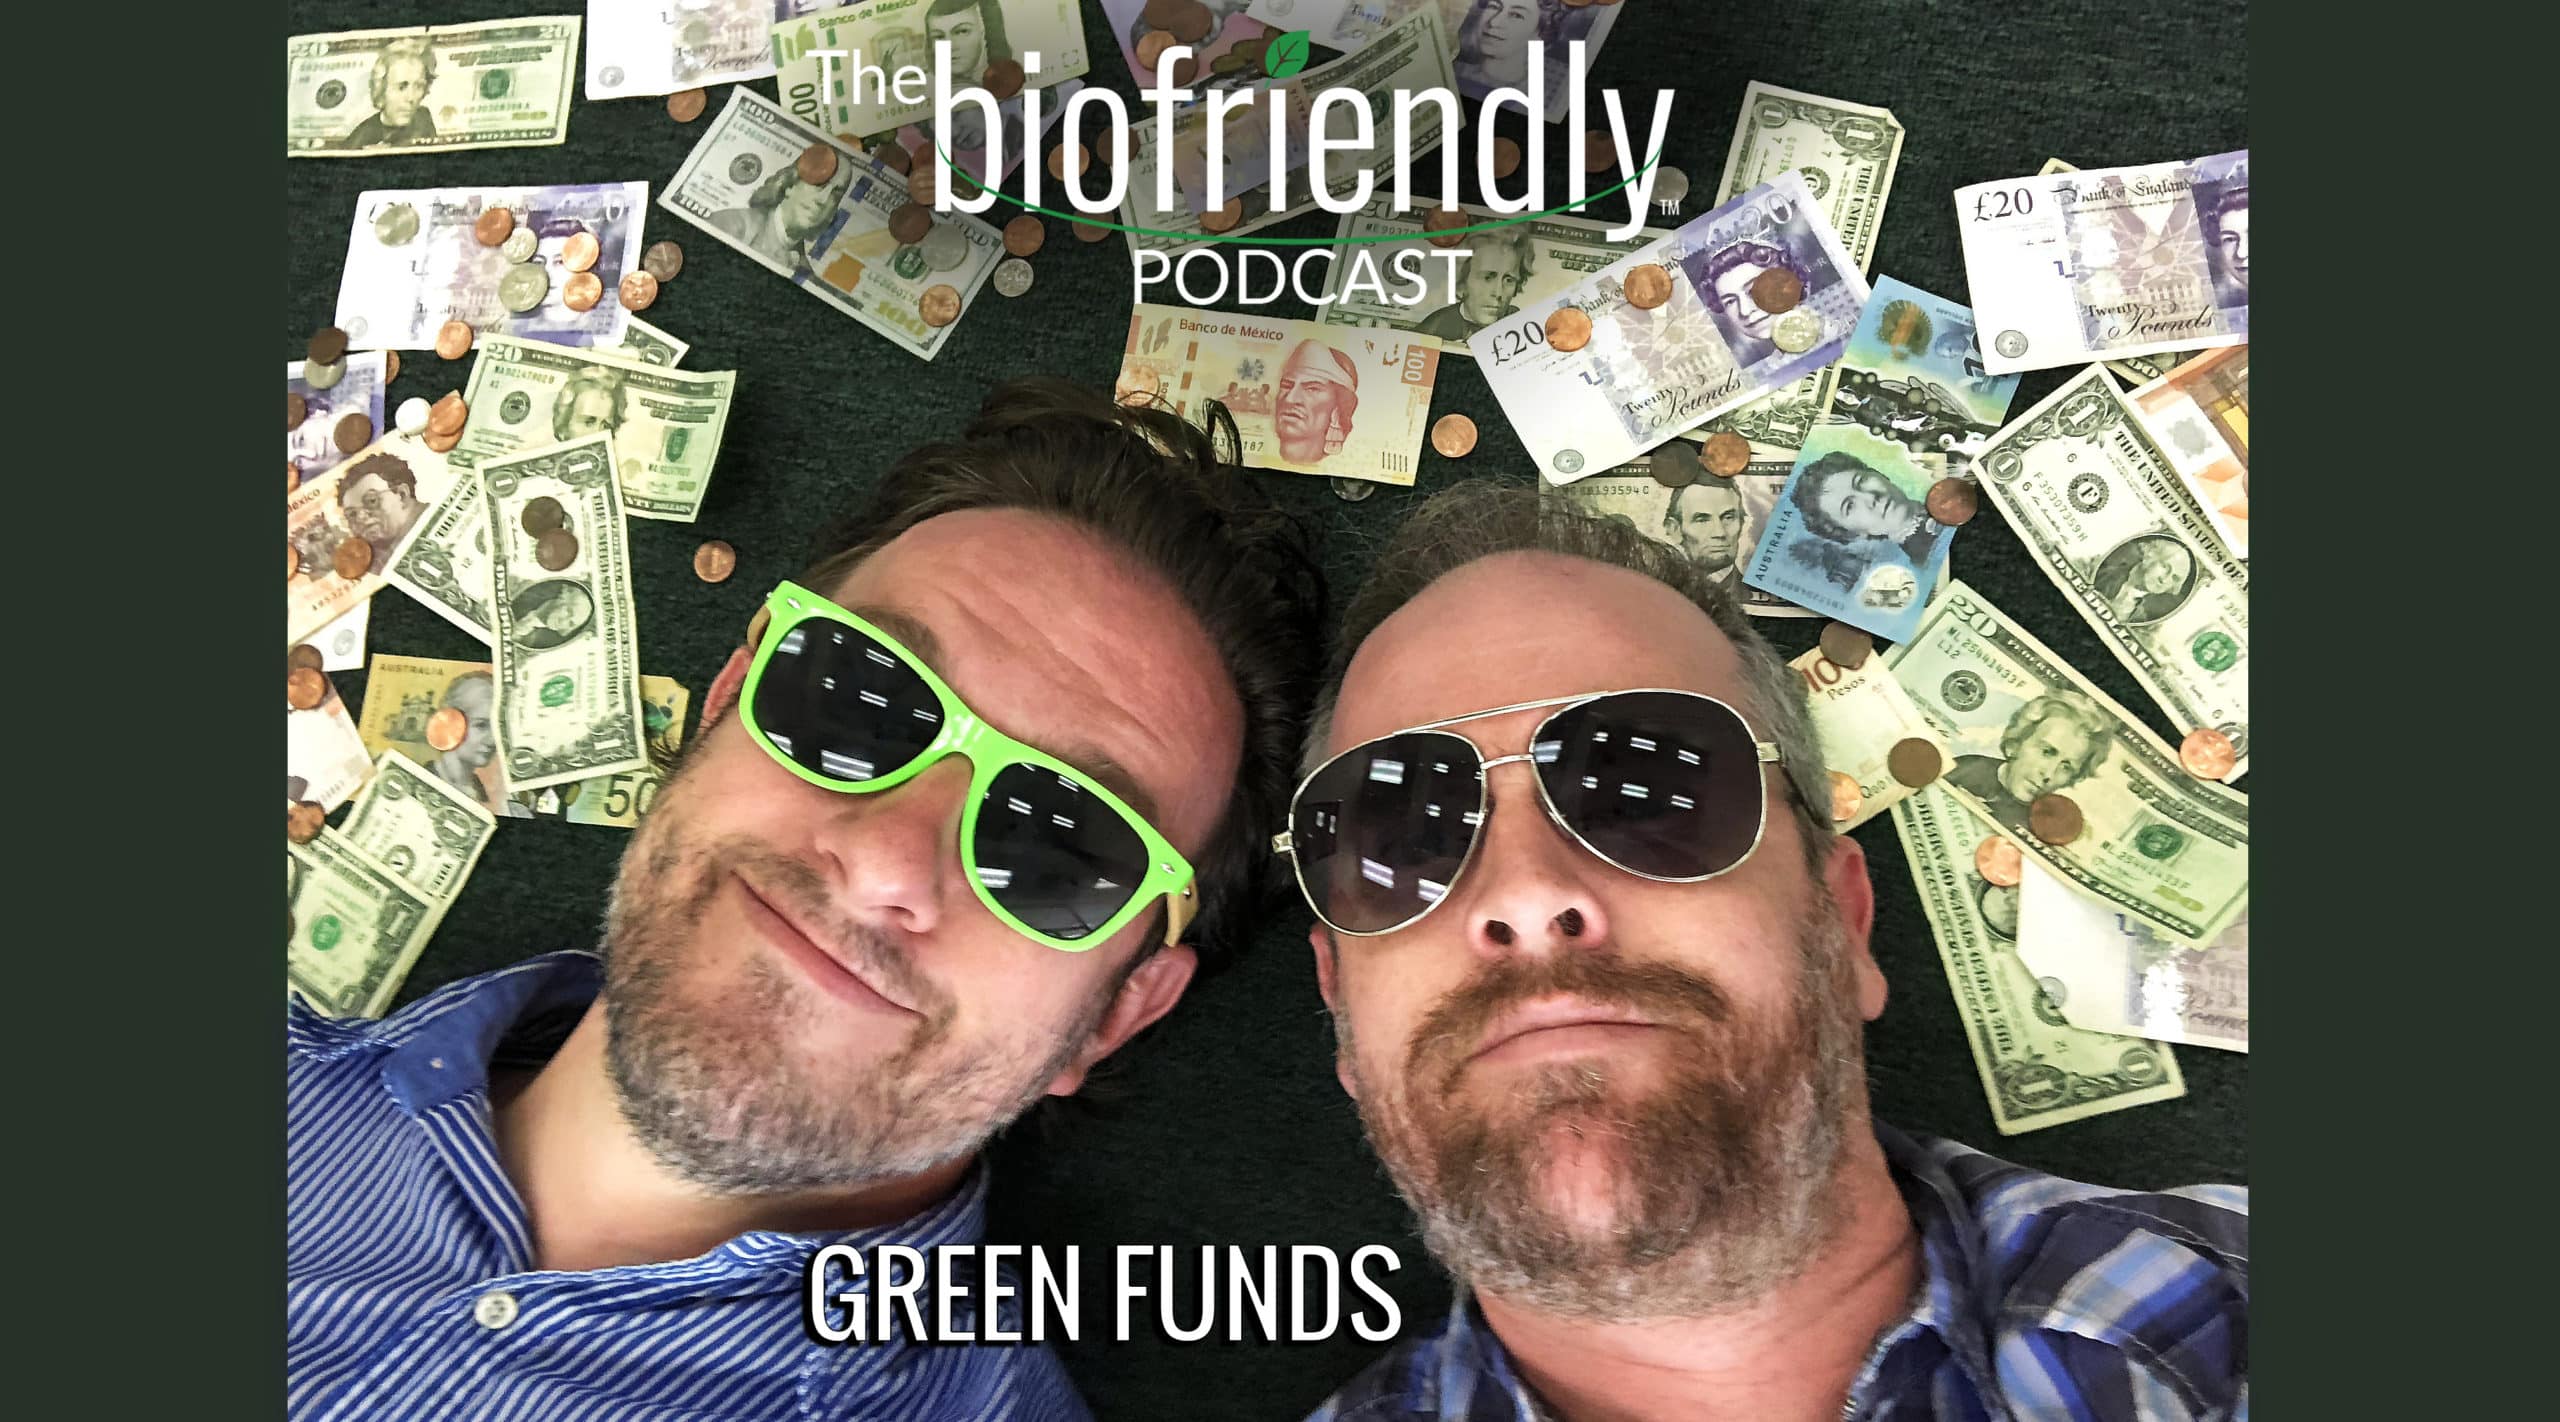 The Biofriendly Podcast - Episode 10 - Green Funds